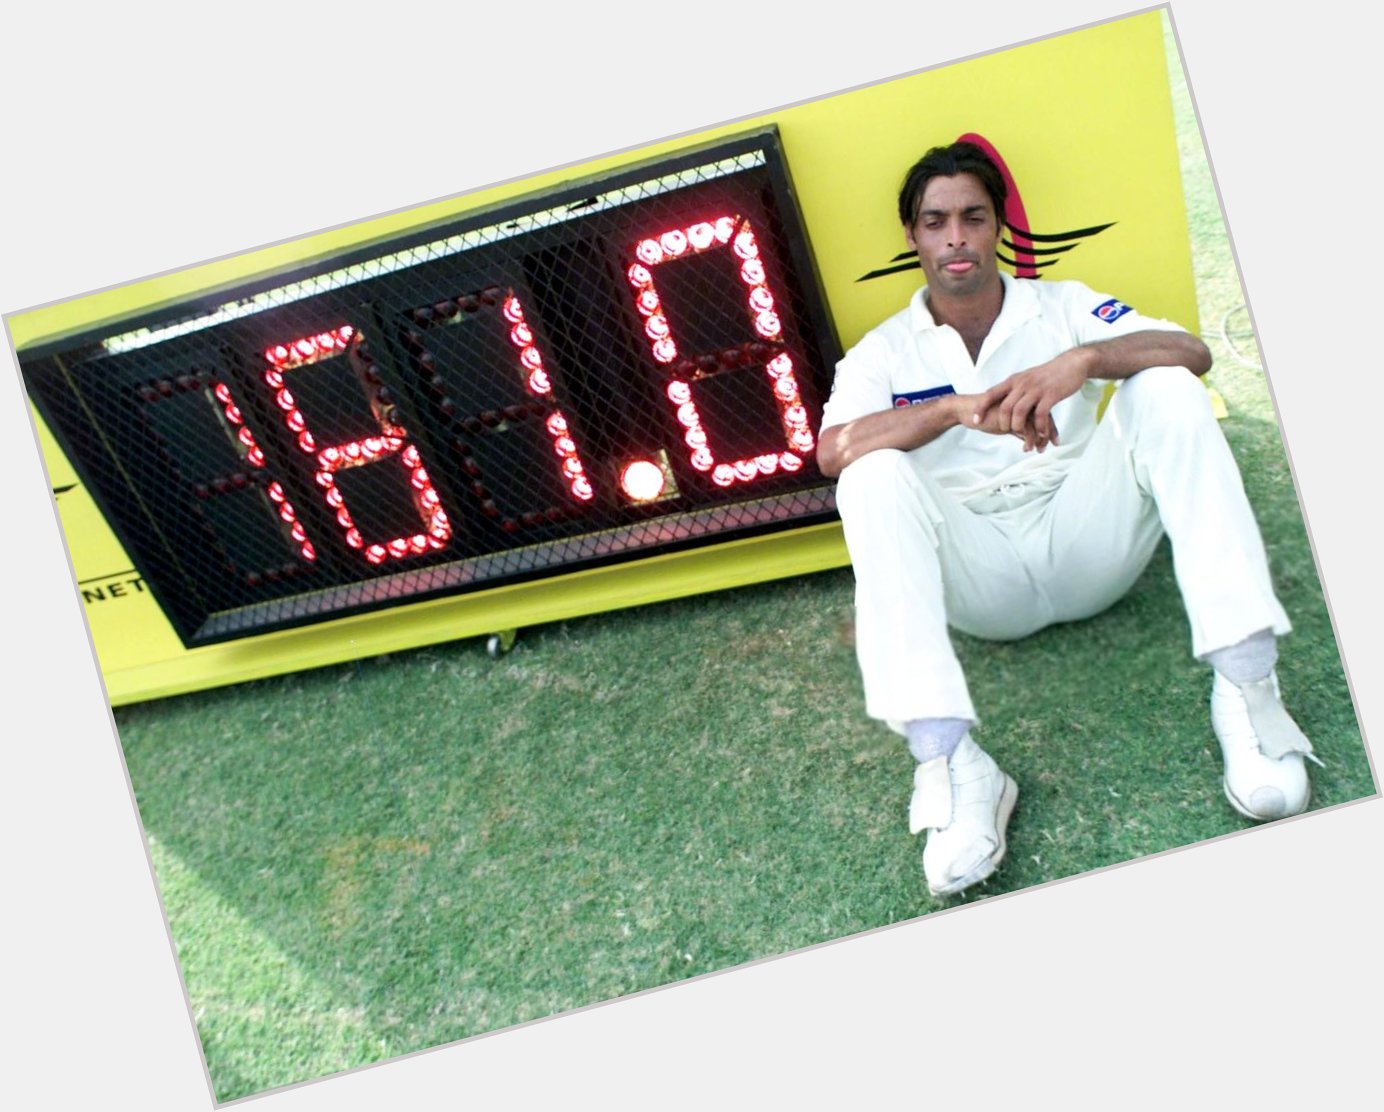 Fastest bowler ever to play the game;

Happy Birthday to Shoaib Akhtar  